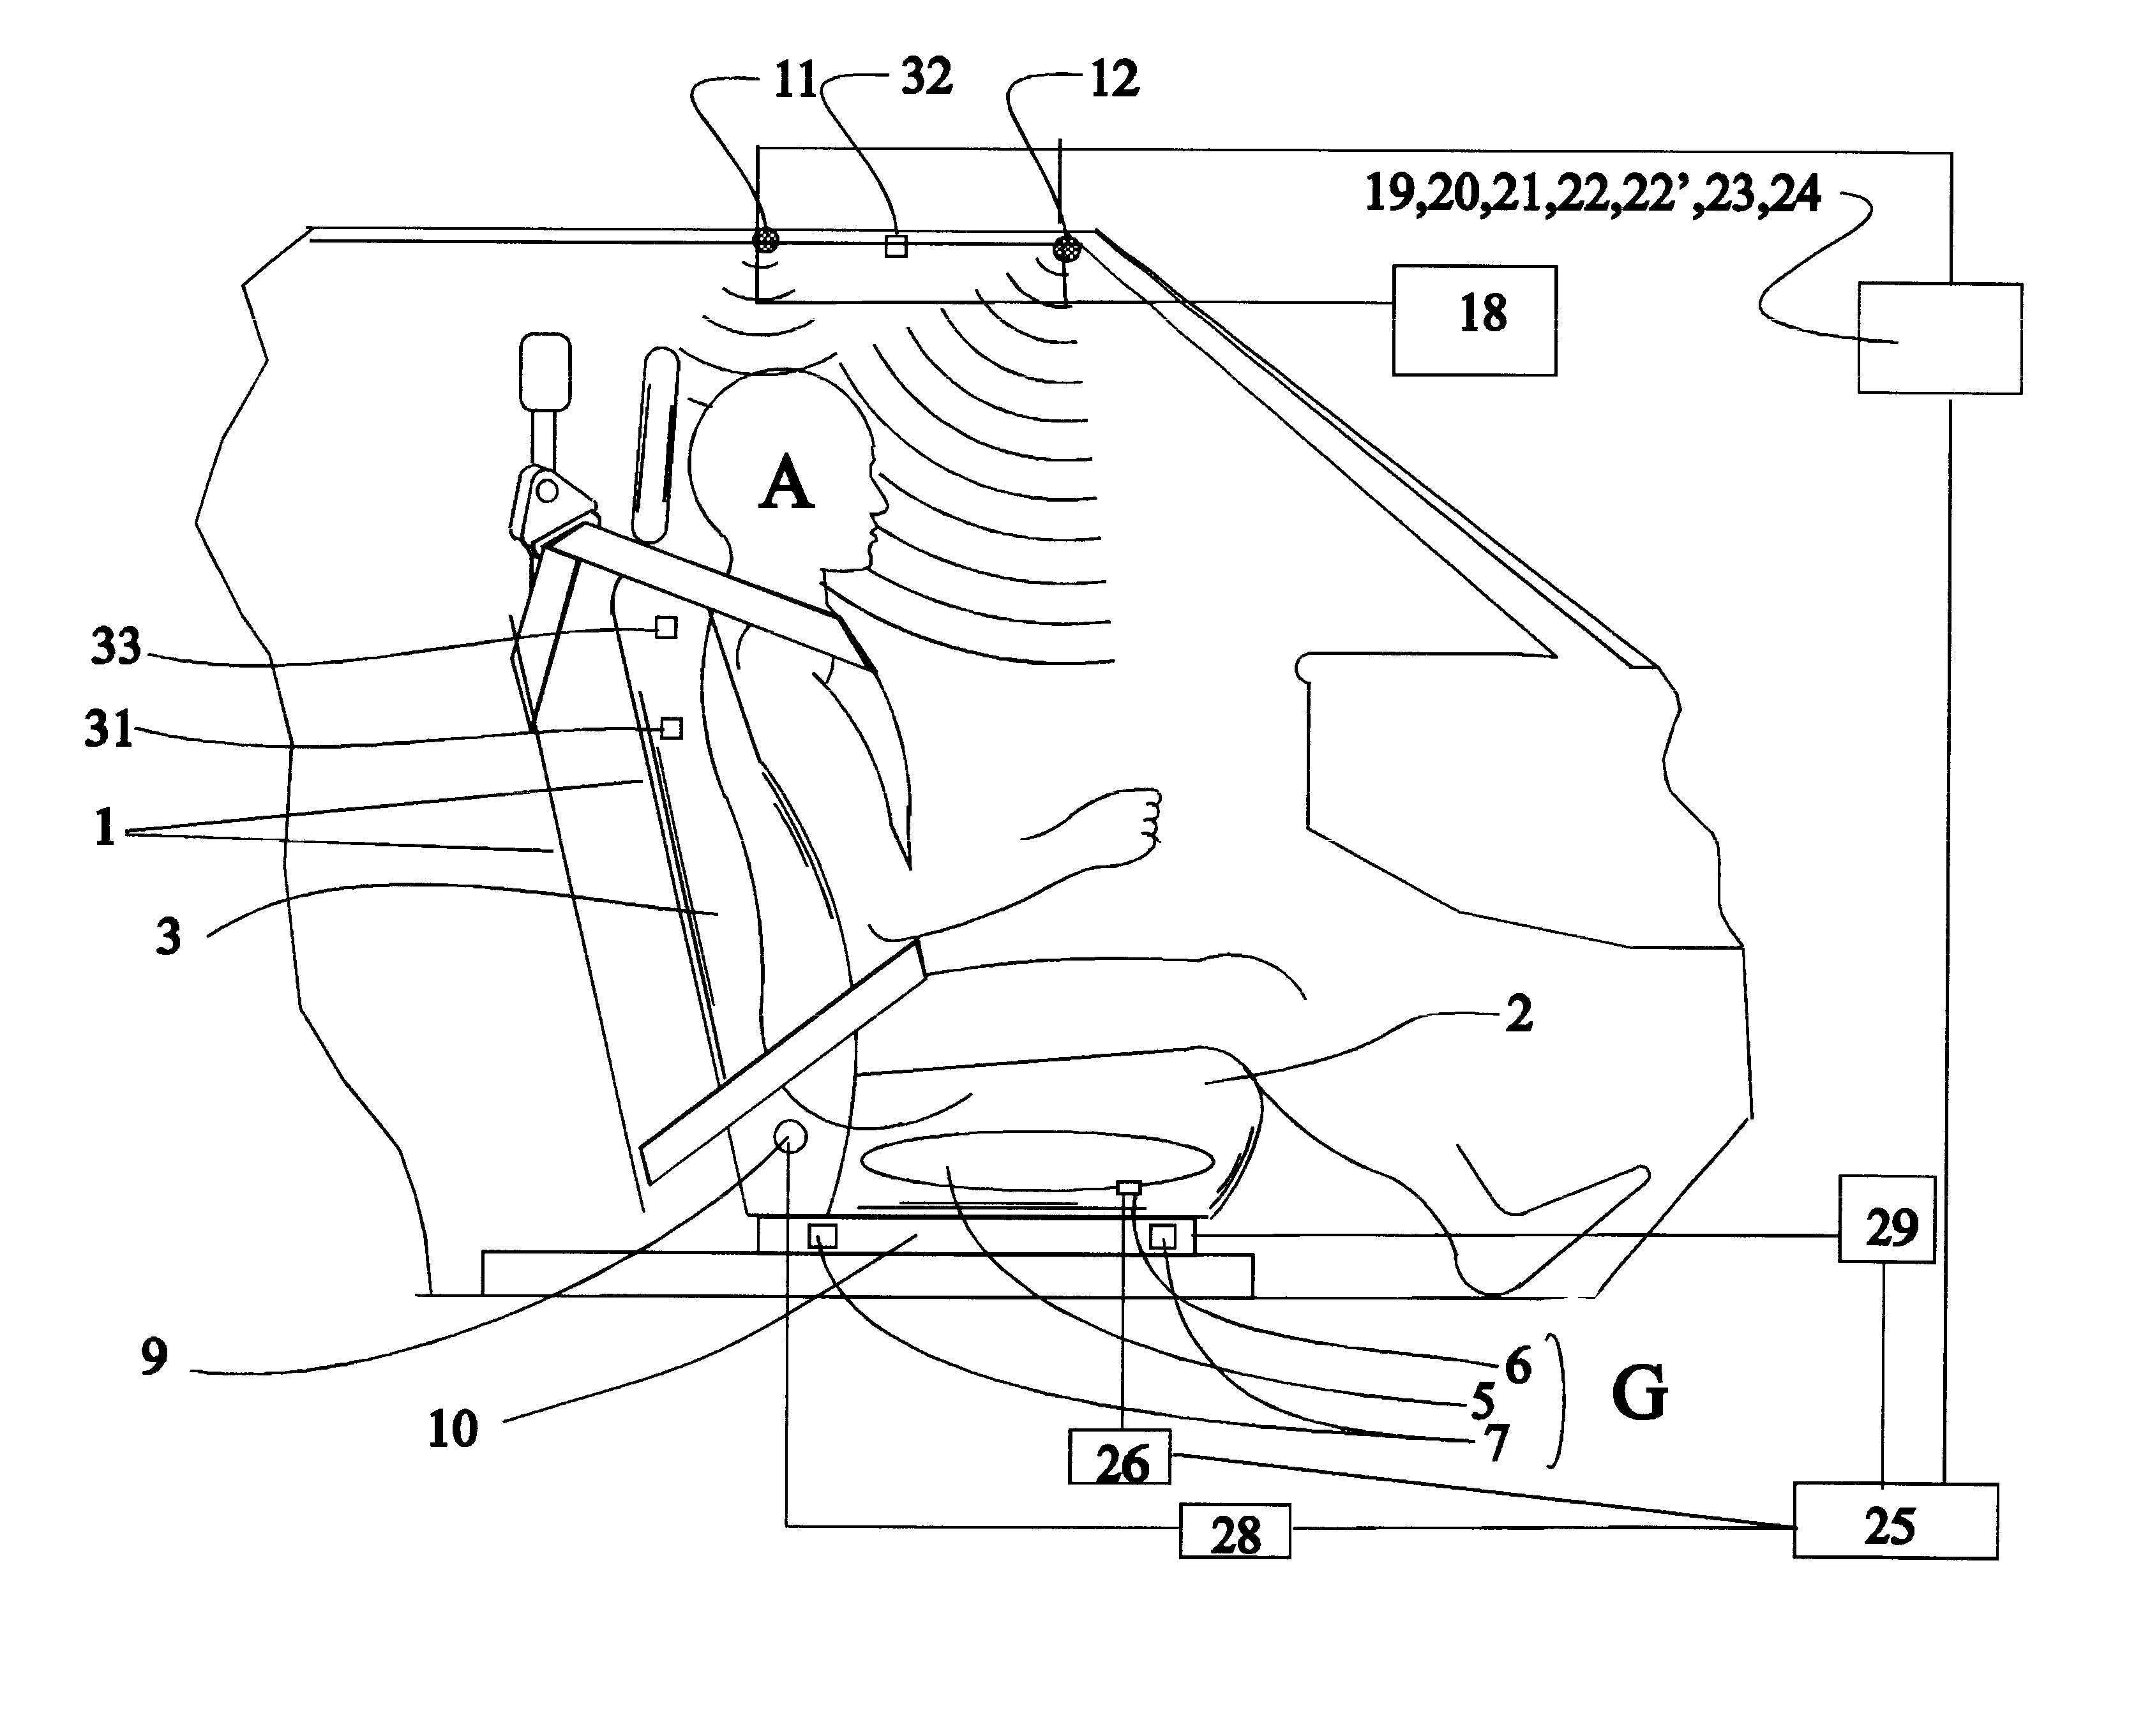 Arrangements for detecting the presence or location of an object in a vehicle and for controlling deployment of a safety restraint